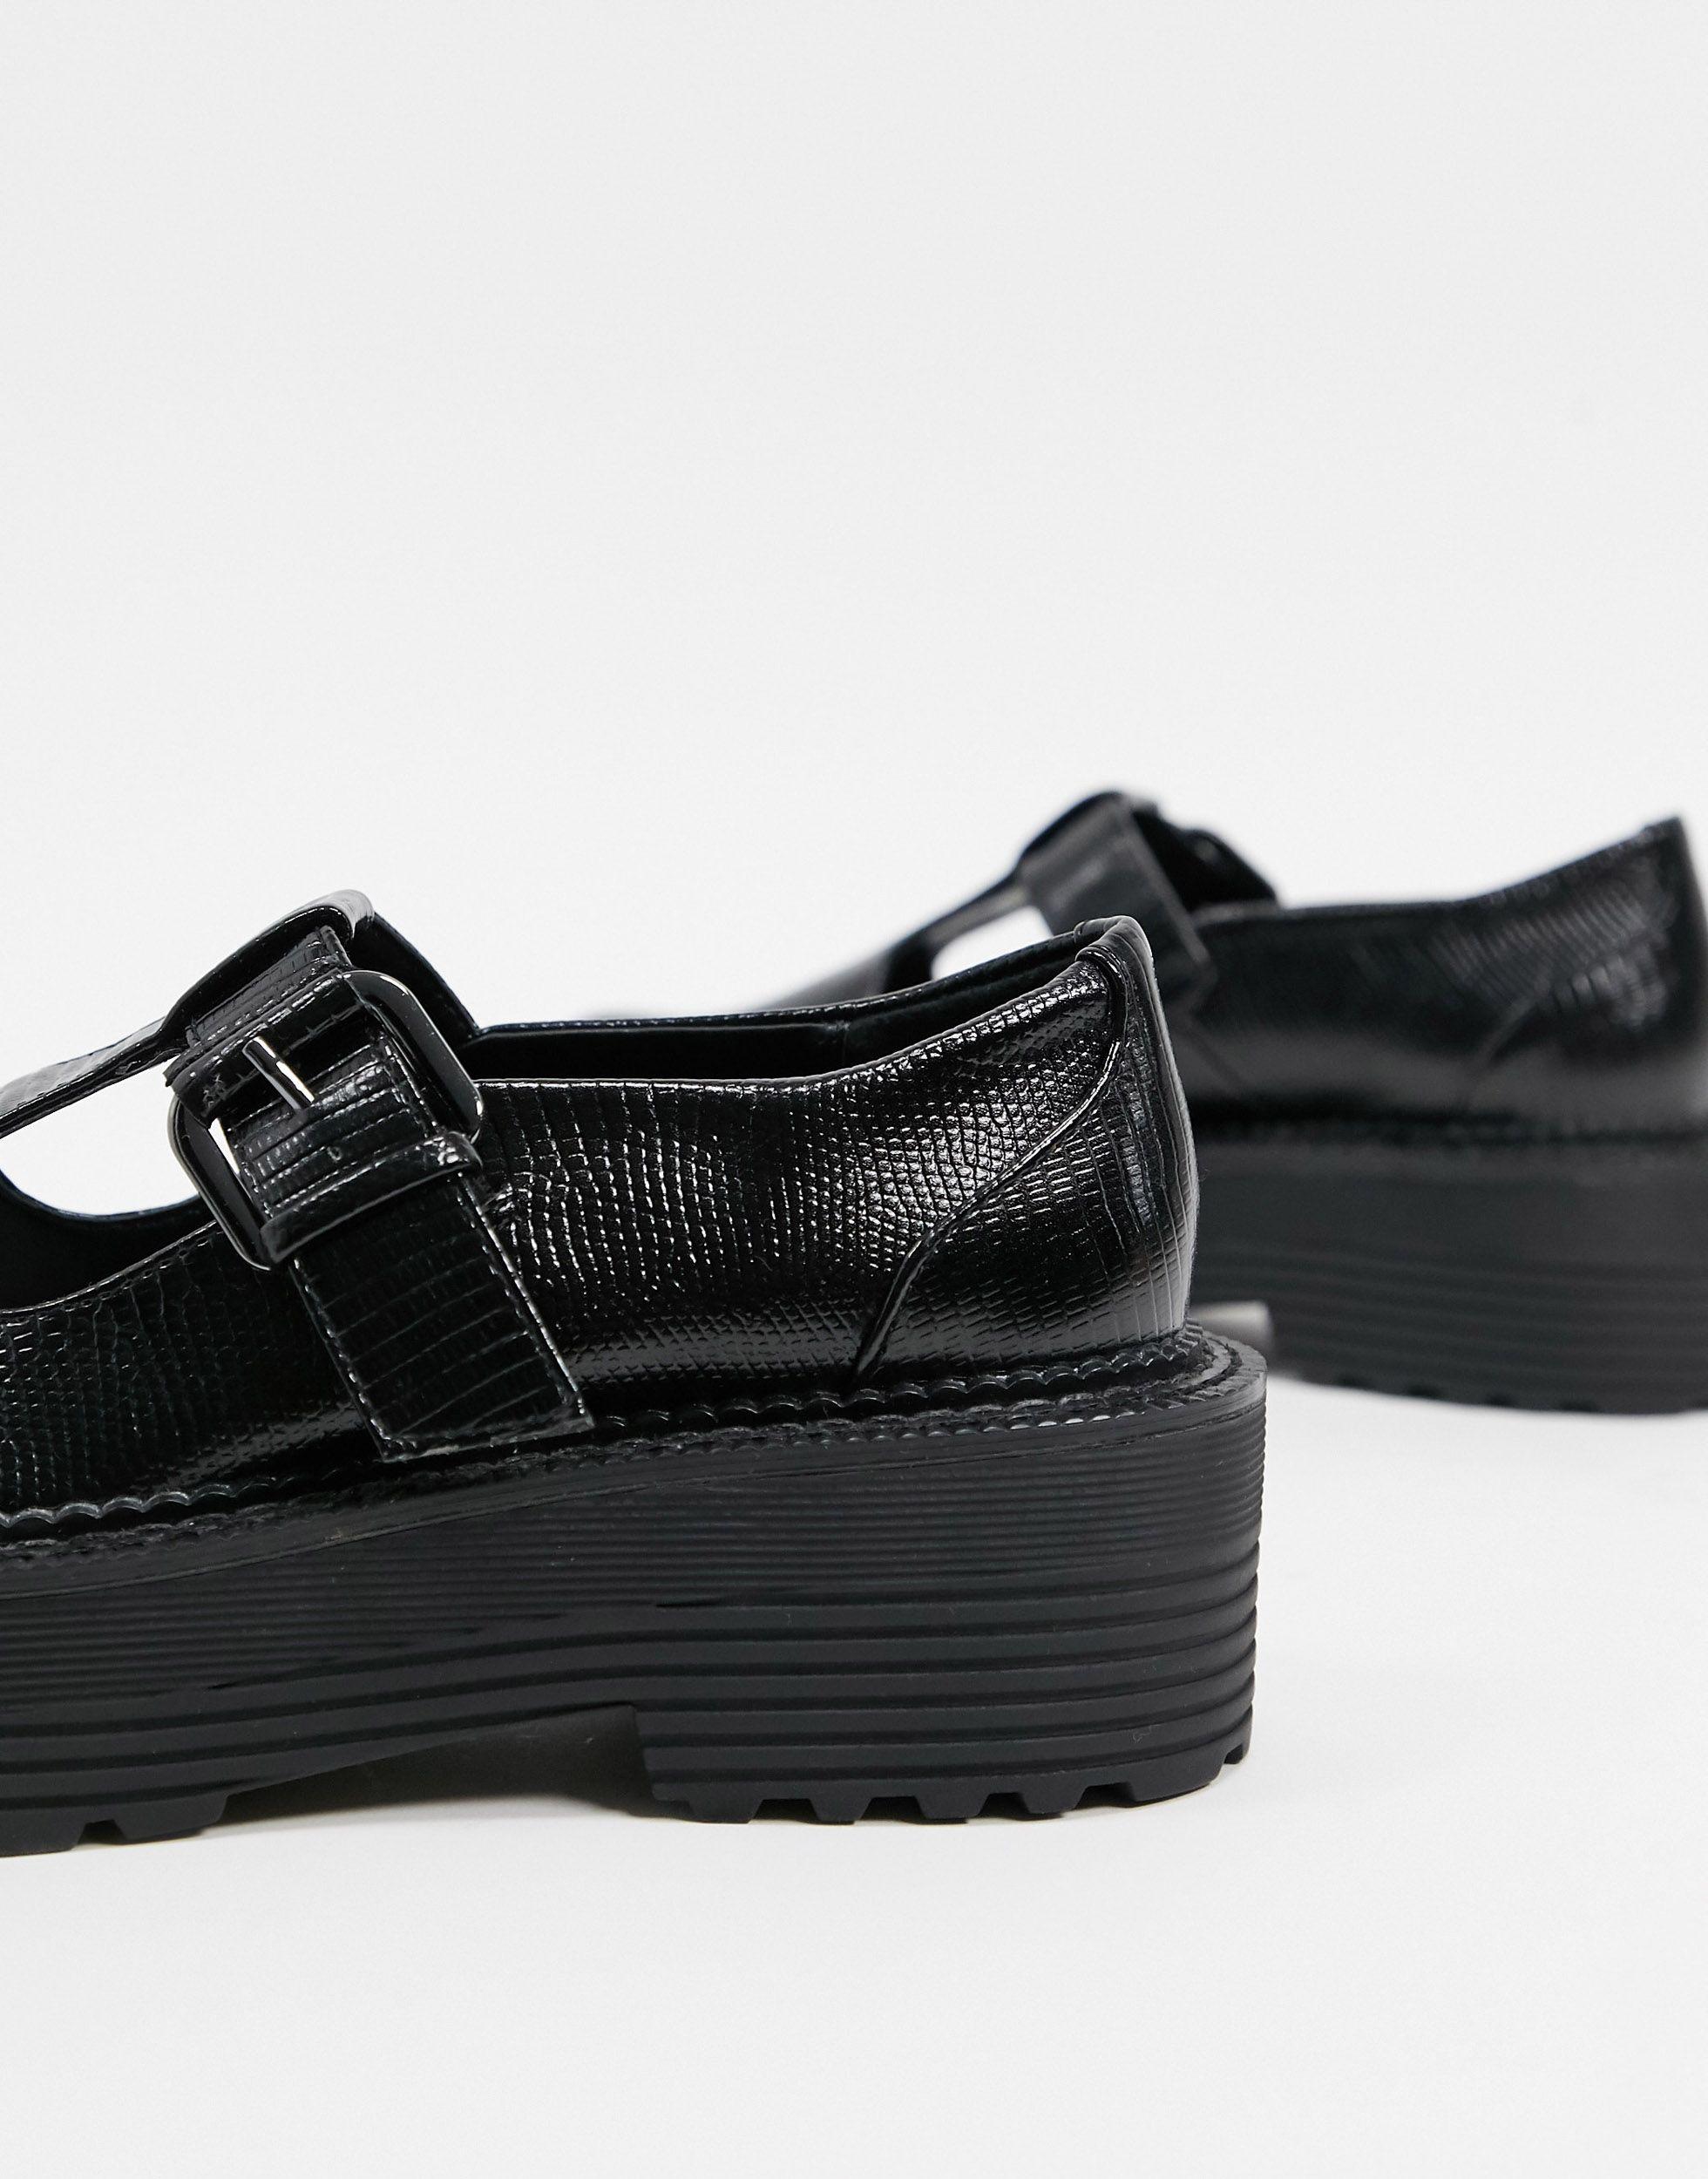 Bershka Platform Mary Jane With Cleated Sole in Black | Lyst